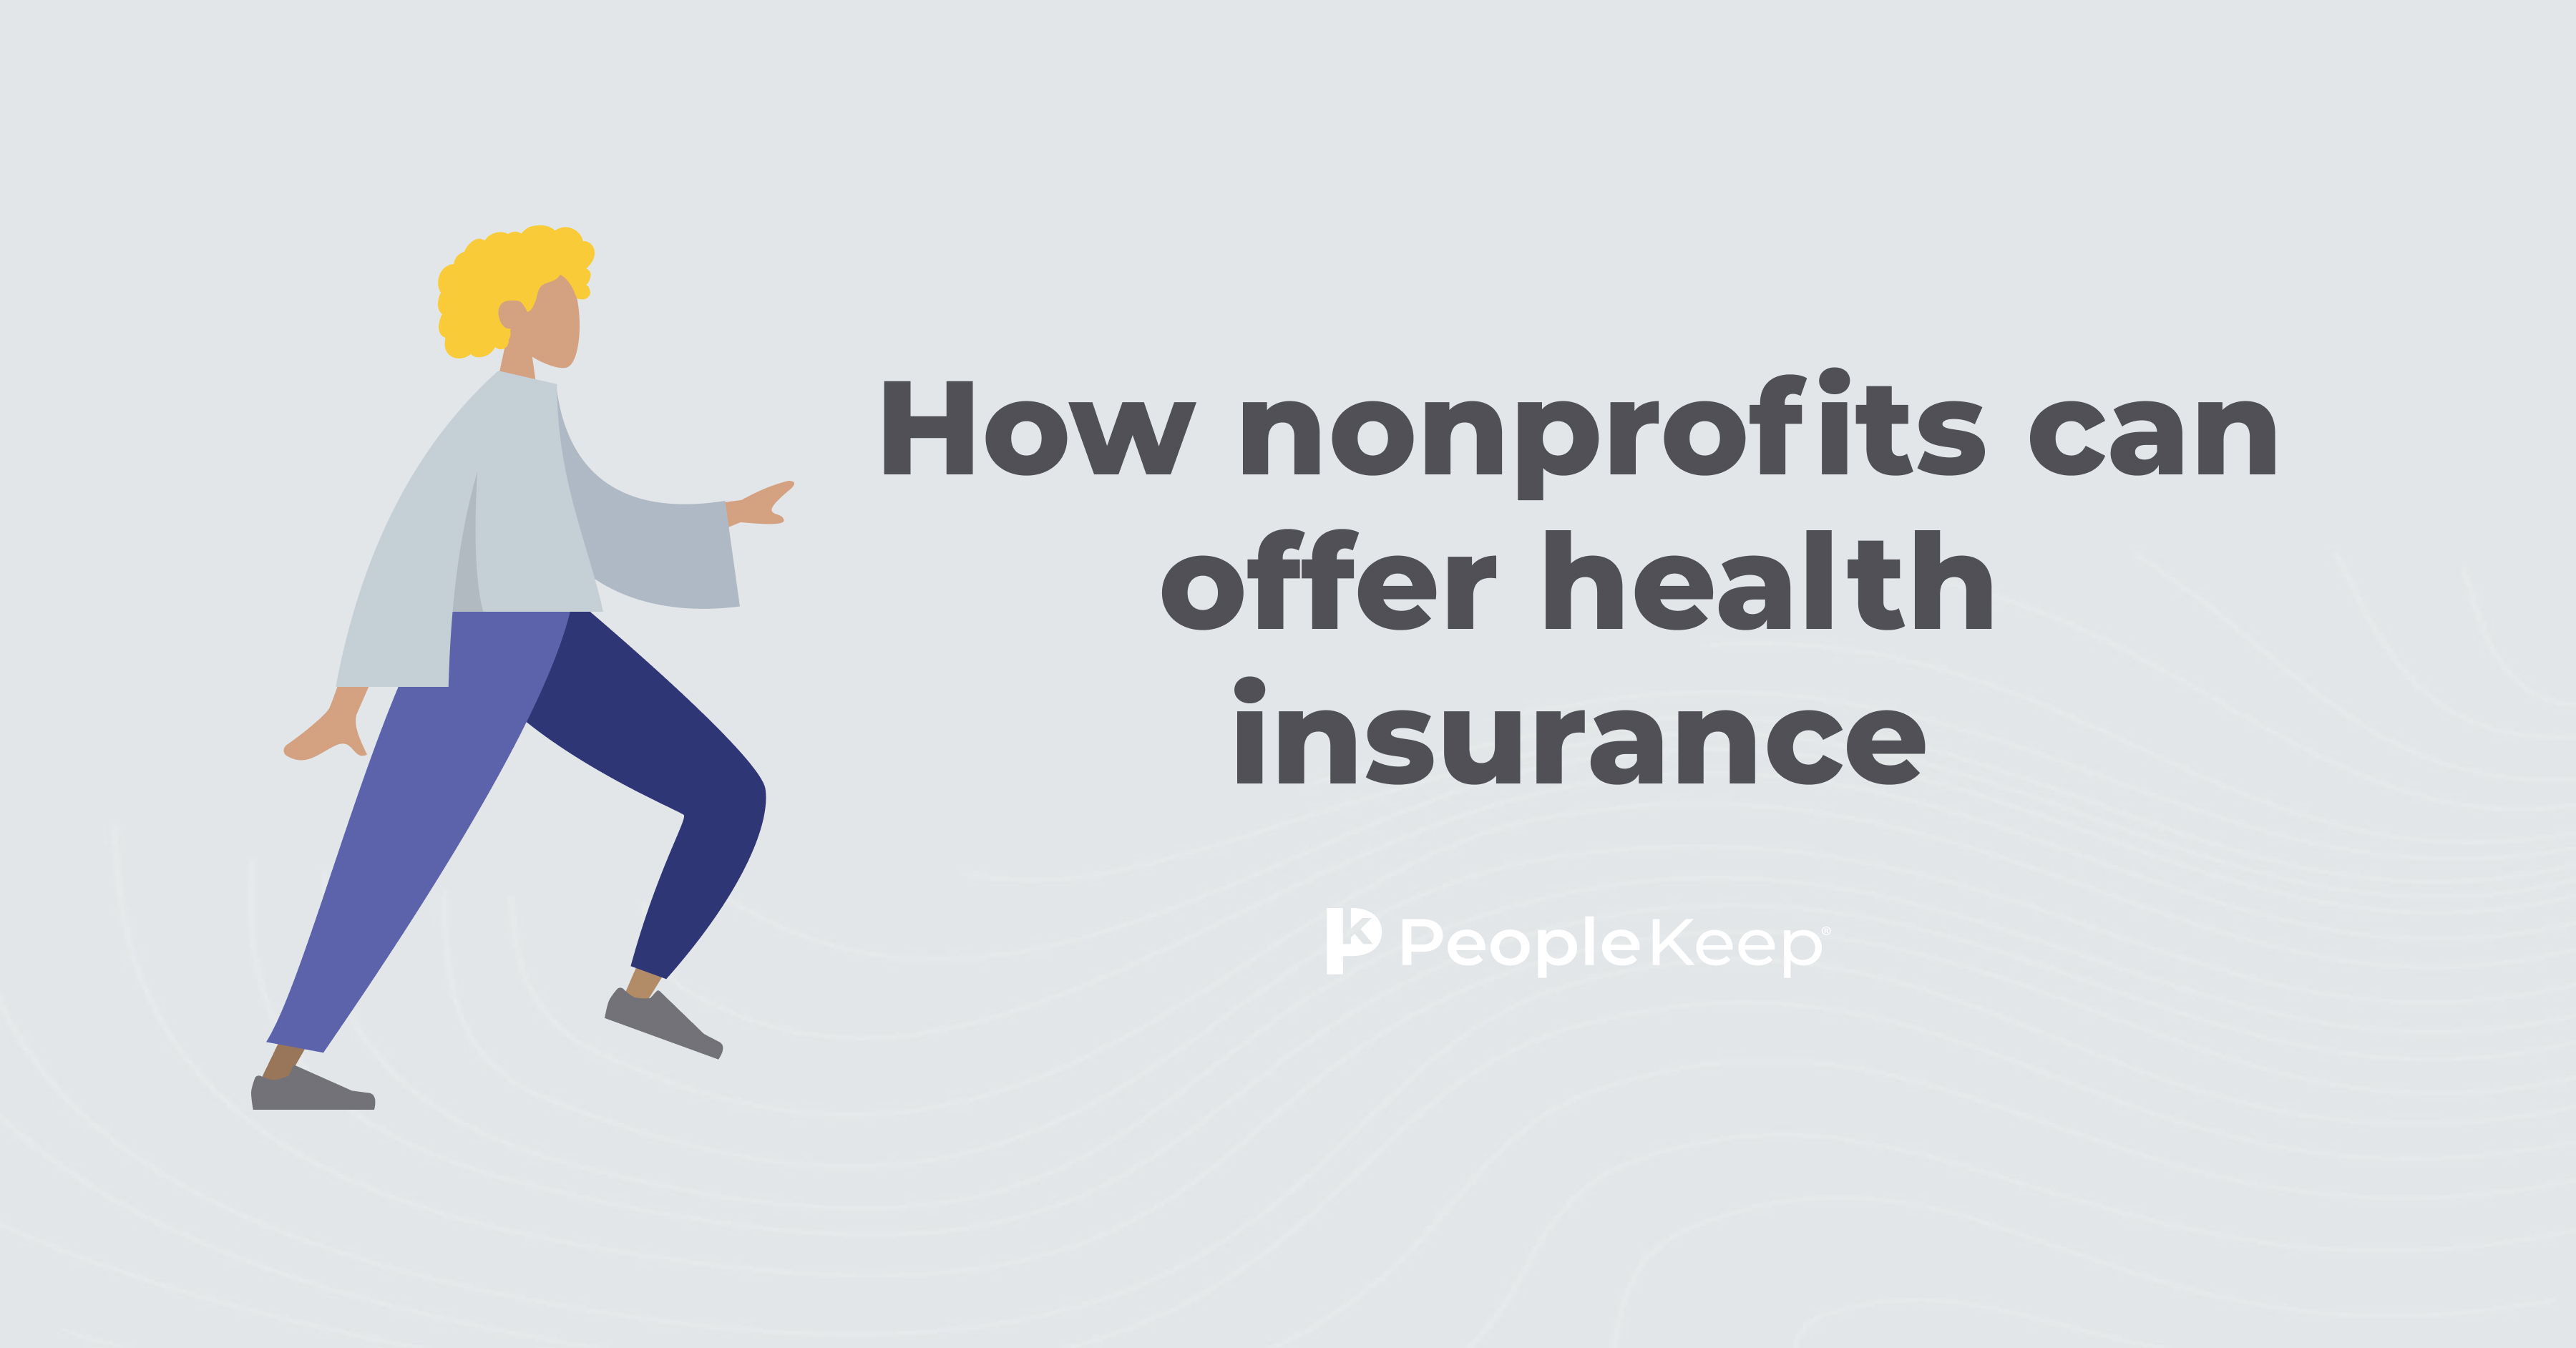 How nonprofits can offer health insurance